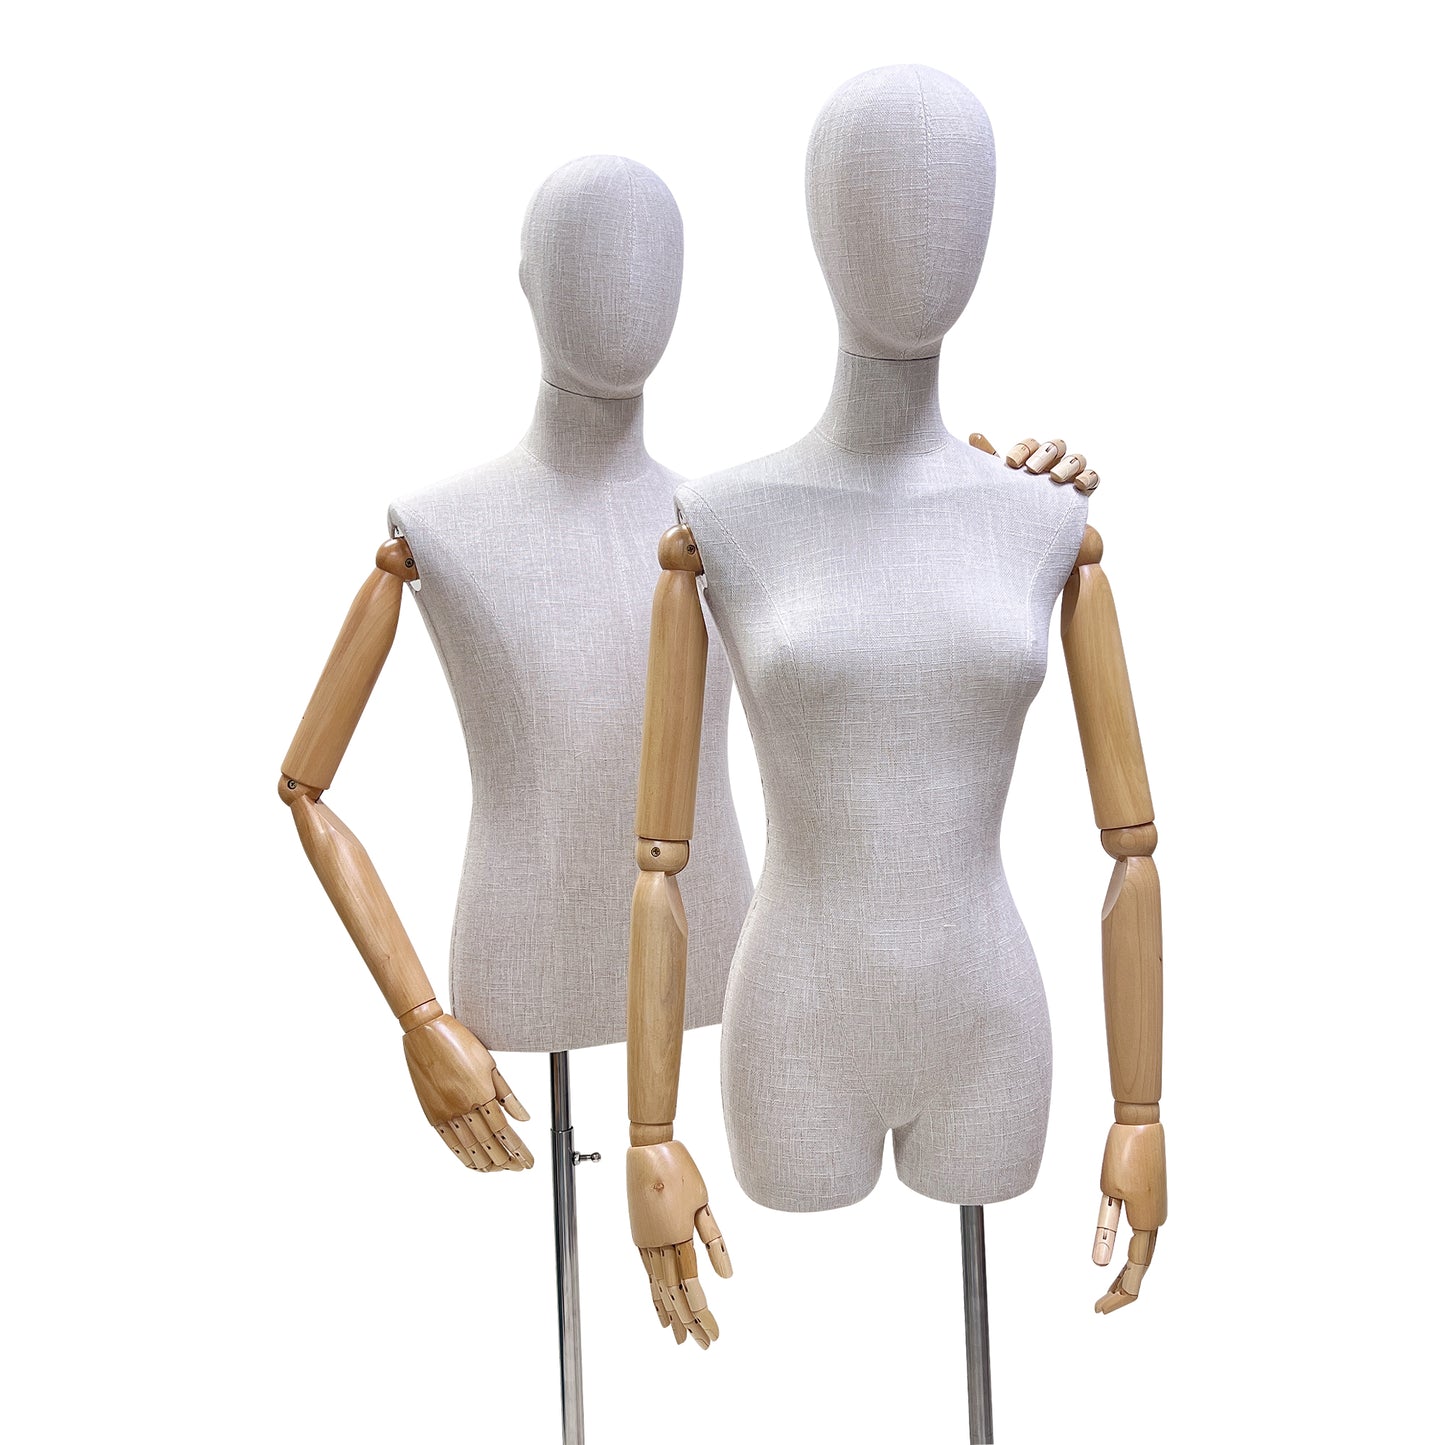 New Style Female|Male Bamboo Linen Mannequin Torso,Luxury High End Fabric Mannequin for Clothes Window Display,Full/Half Body Mannequin Torso